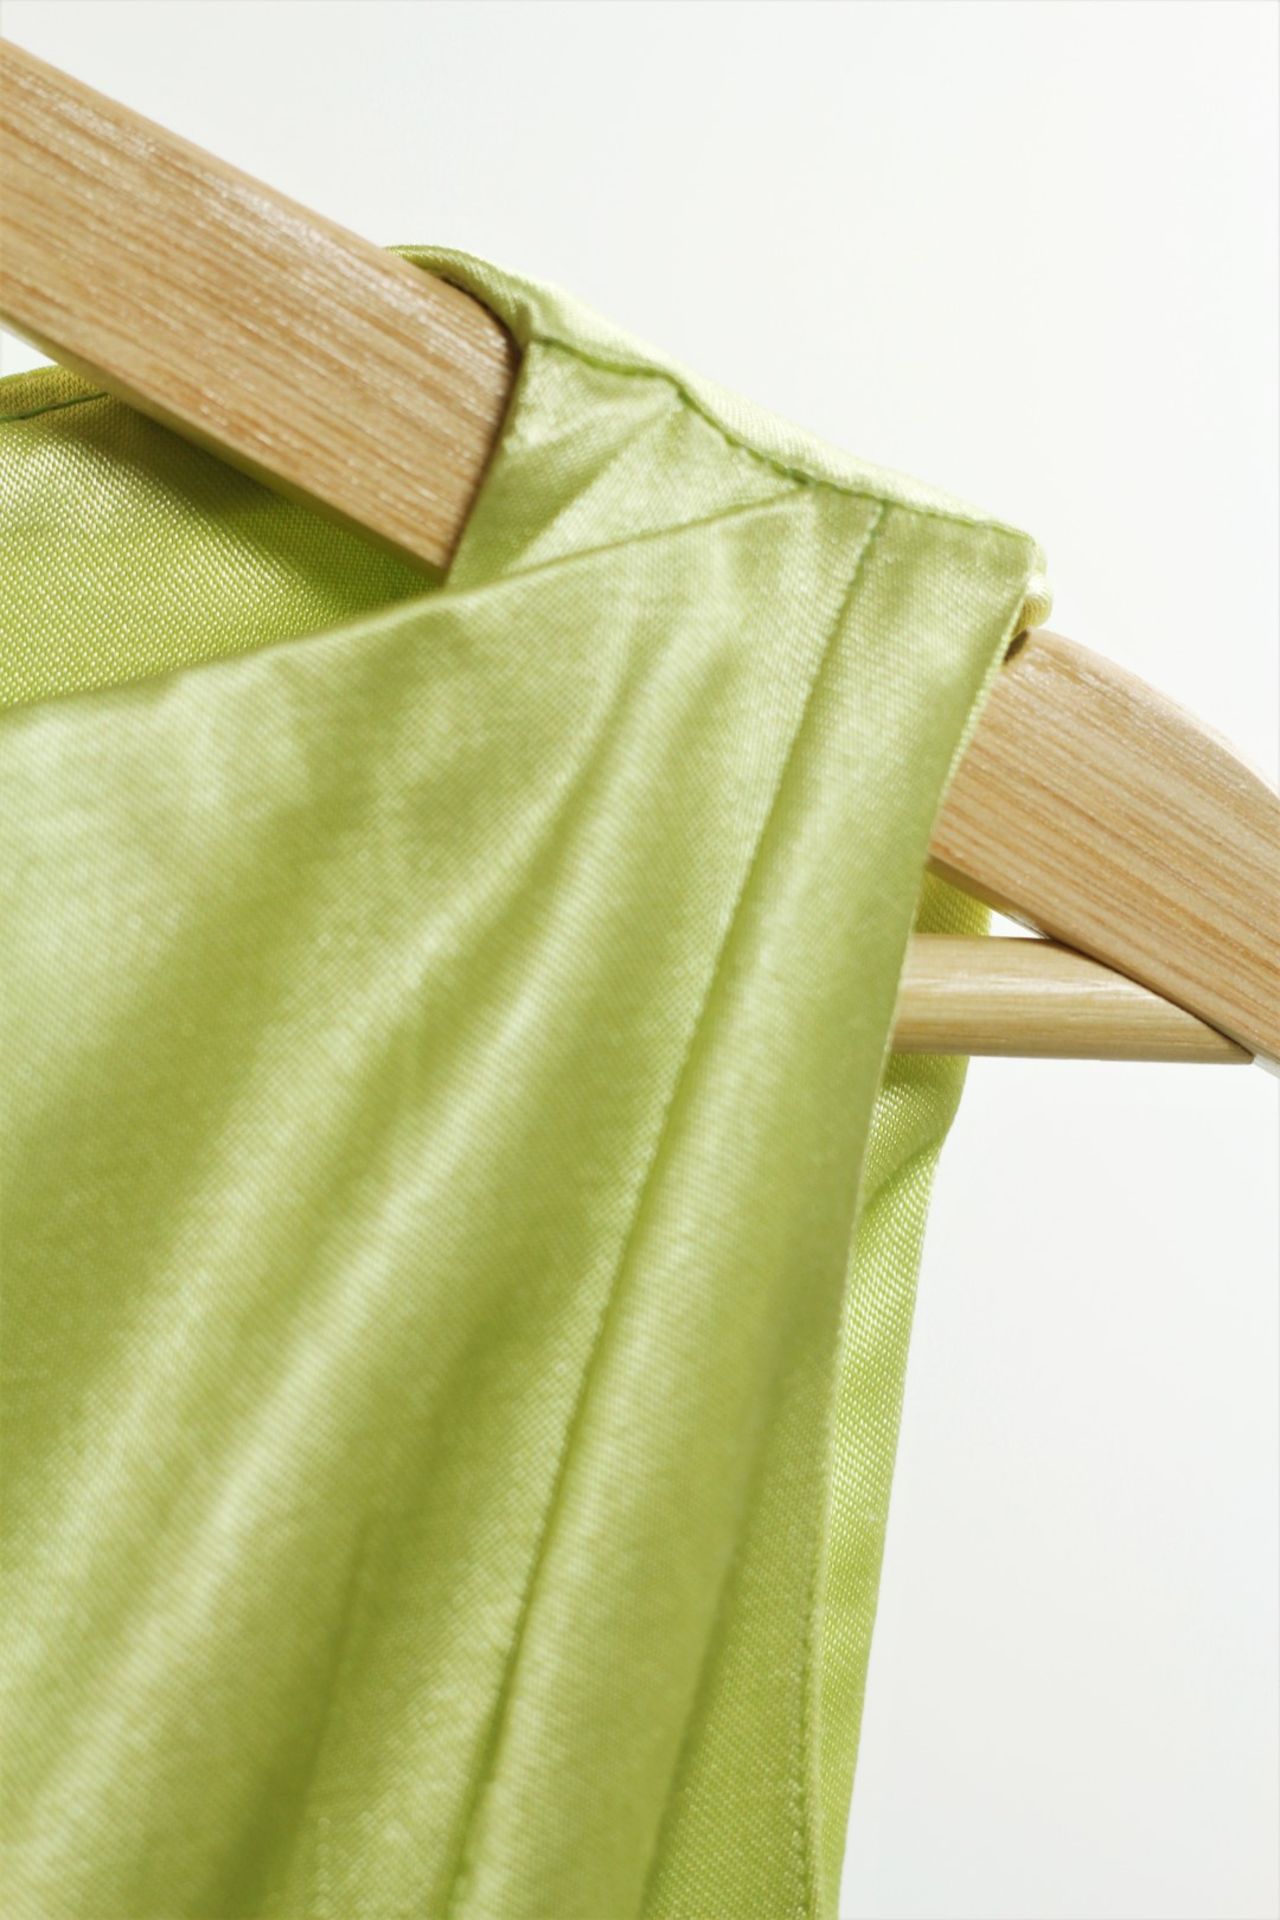 1 x Boutique Le Duc Lime Green Vest - From a High End Clothing Boutique In The - Image 3 of 9